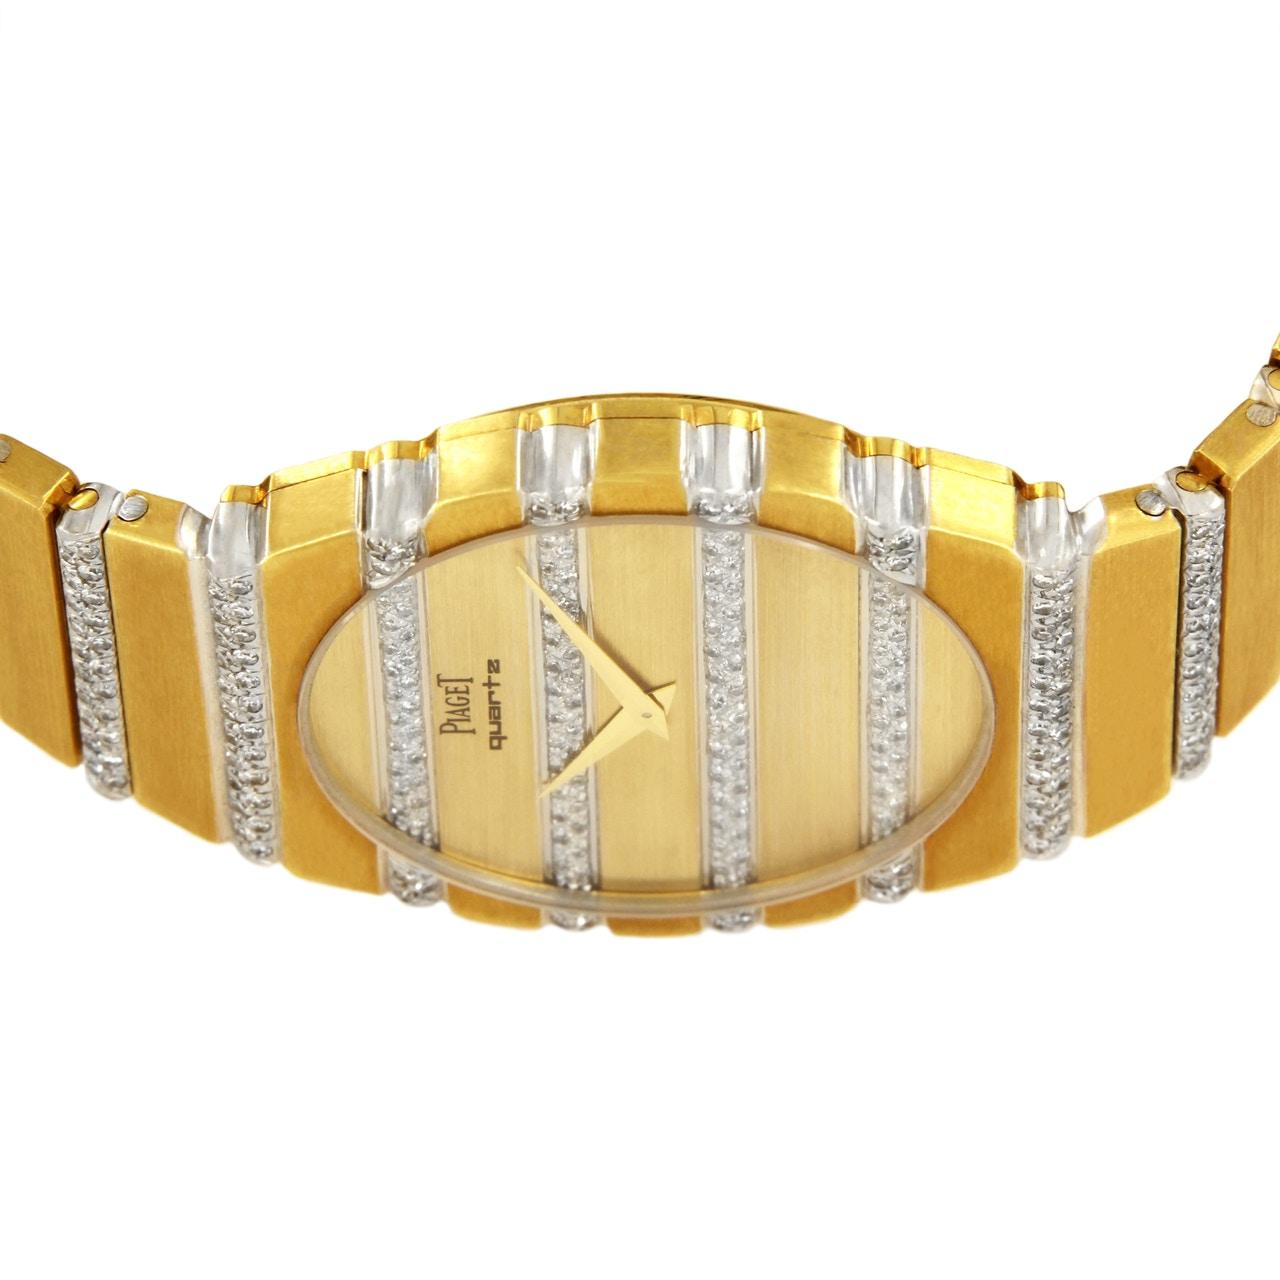 PIAGET POLO TWO TONE GOLD & DIAMOND WATCH 367758

-Condition: Mint 
-Material: 18k Yellow Gold & 18k White Gold & Diamonds
-Case size: 34mm
-Movement: Quartz
-Dial: Gold, diamond set
-Crystal: Sapphire
-Clasp: Fold over
-Weight: 145gr
-Length: